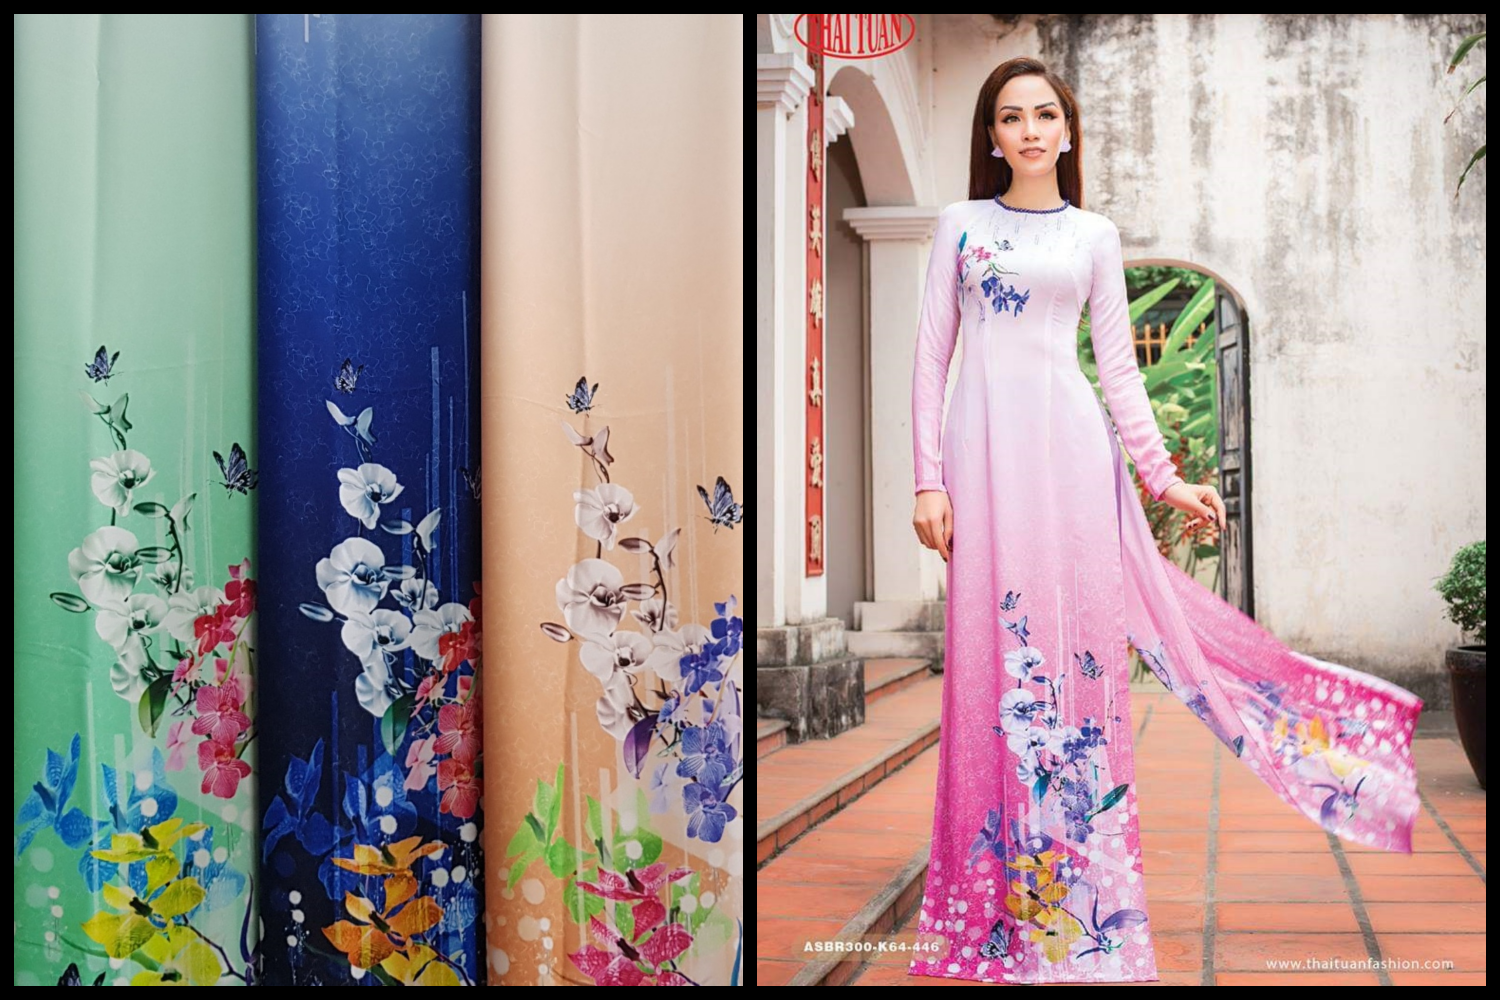 Made-to-measure ao dai by Mark&Vy using high quality, Thai Tuan fabric. Pretty floral motif.